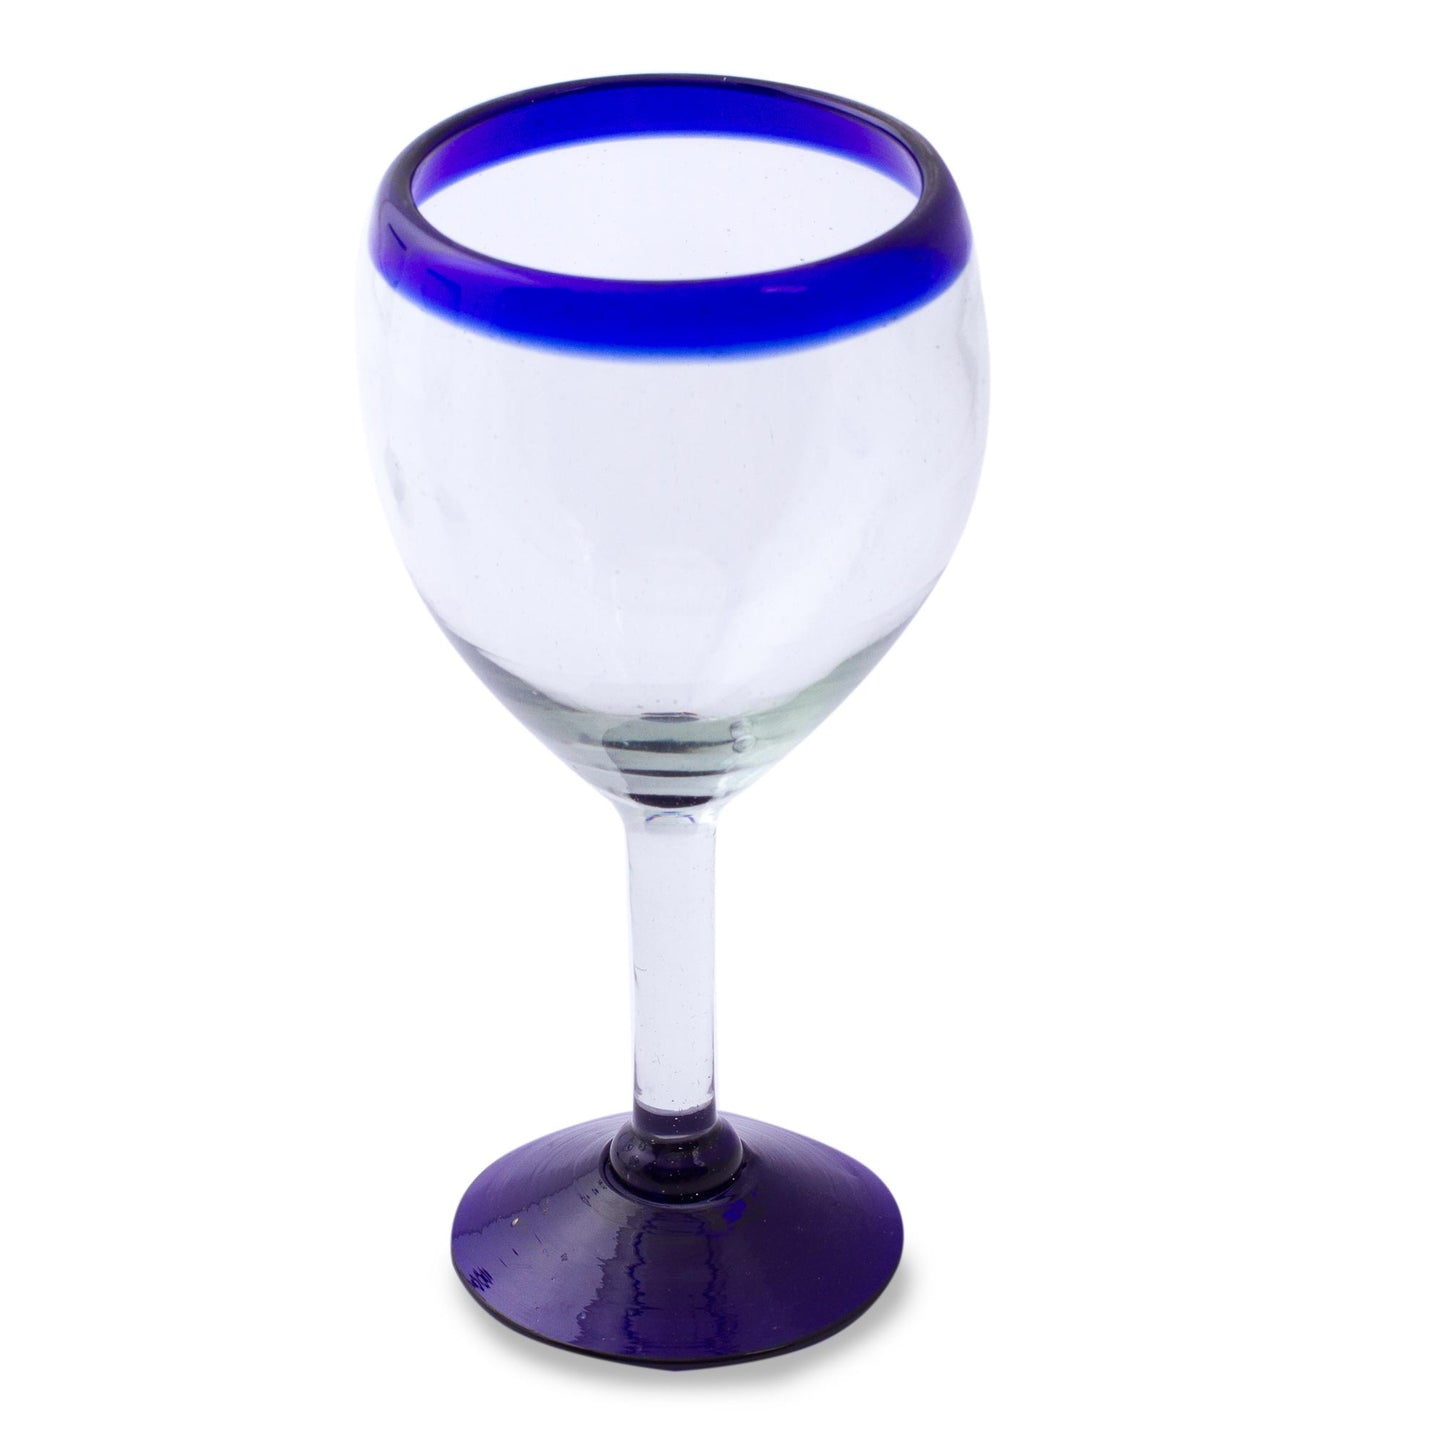 Cobalt Contrasts Set of Six Eco Friendly Hand Blown Wine Goblets